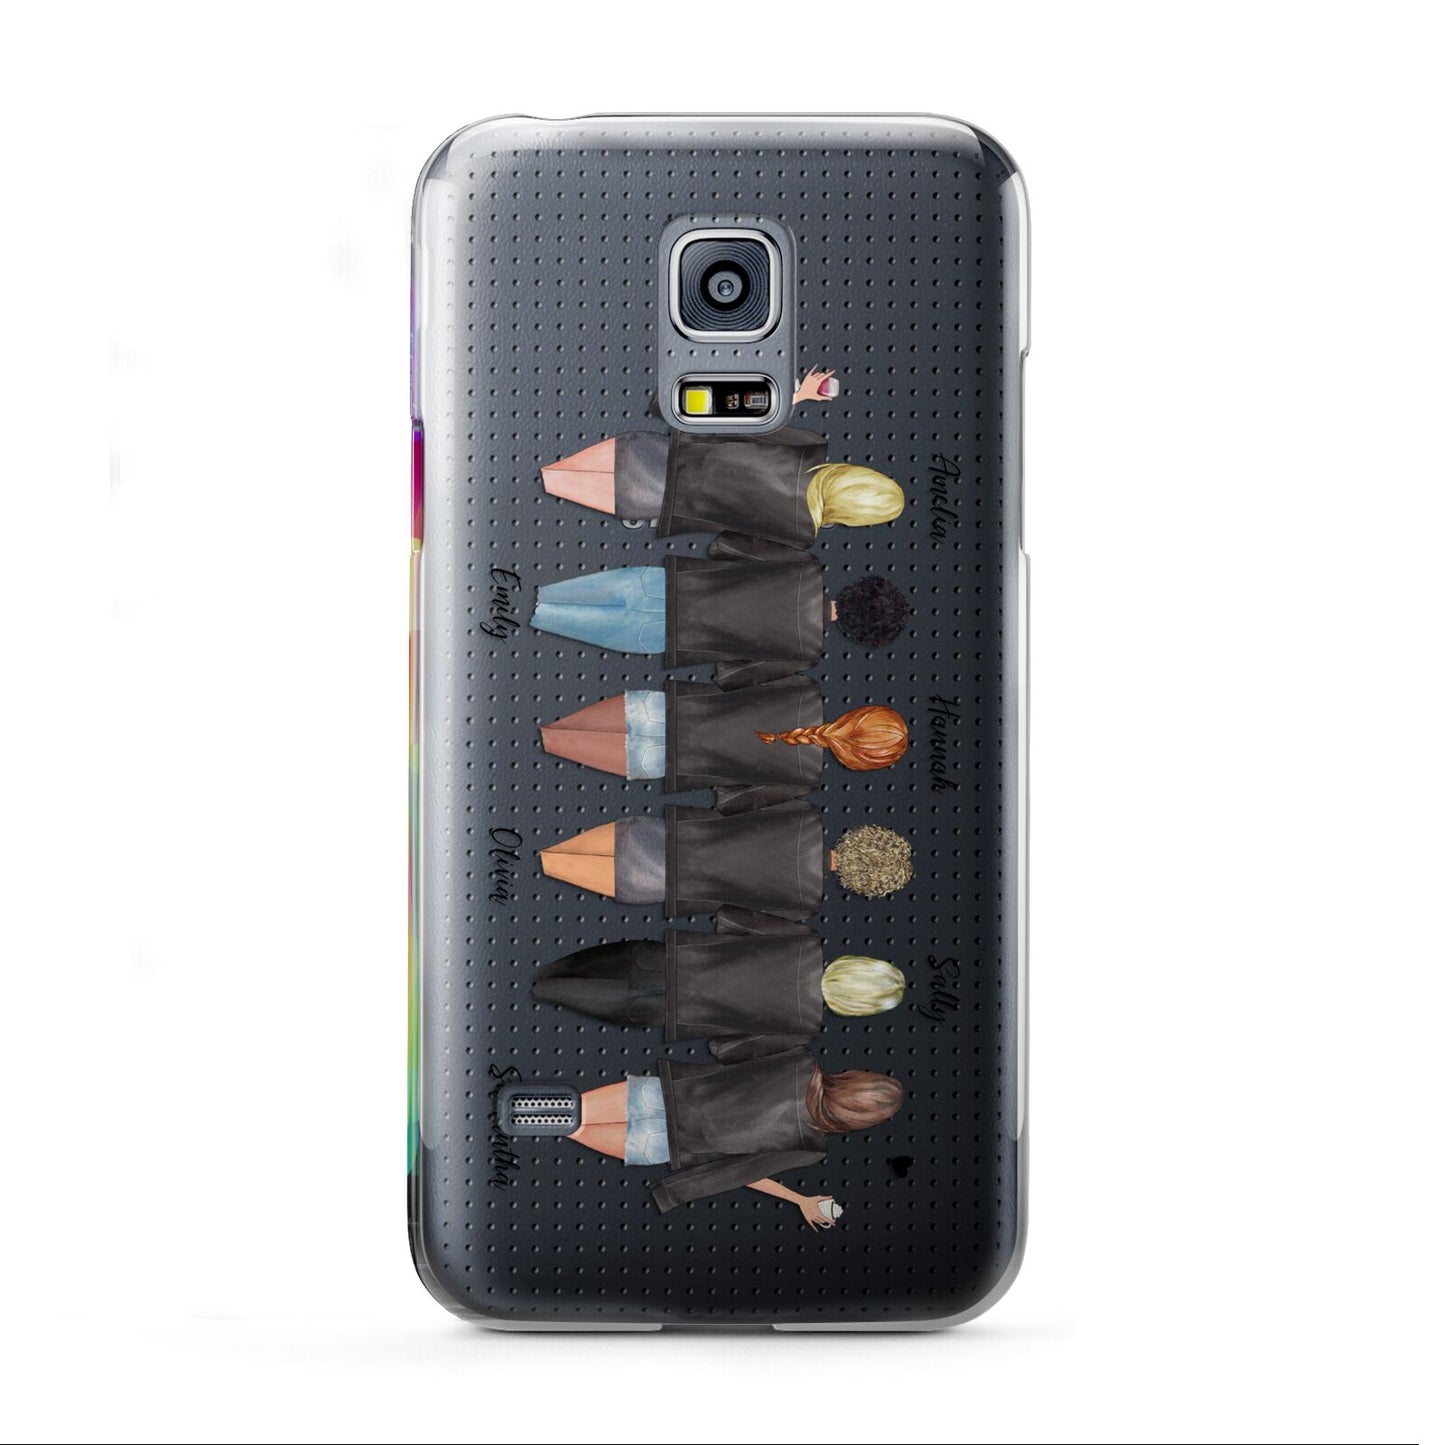 6 Best Friends with Names Samsung Galaxy S5 Mini Case